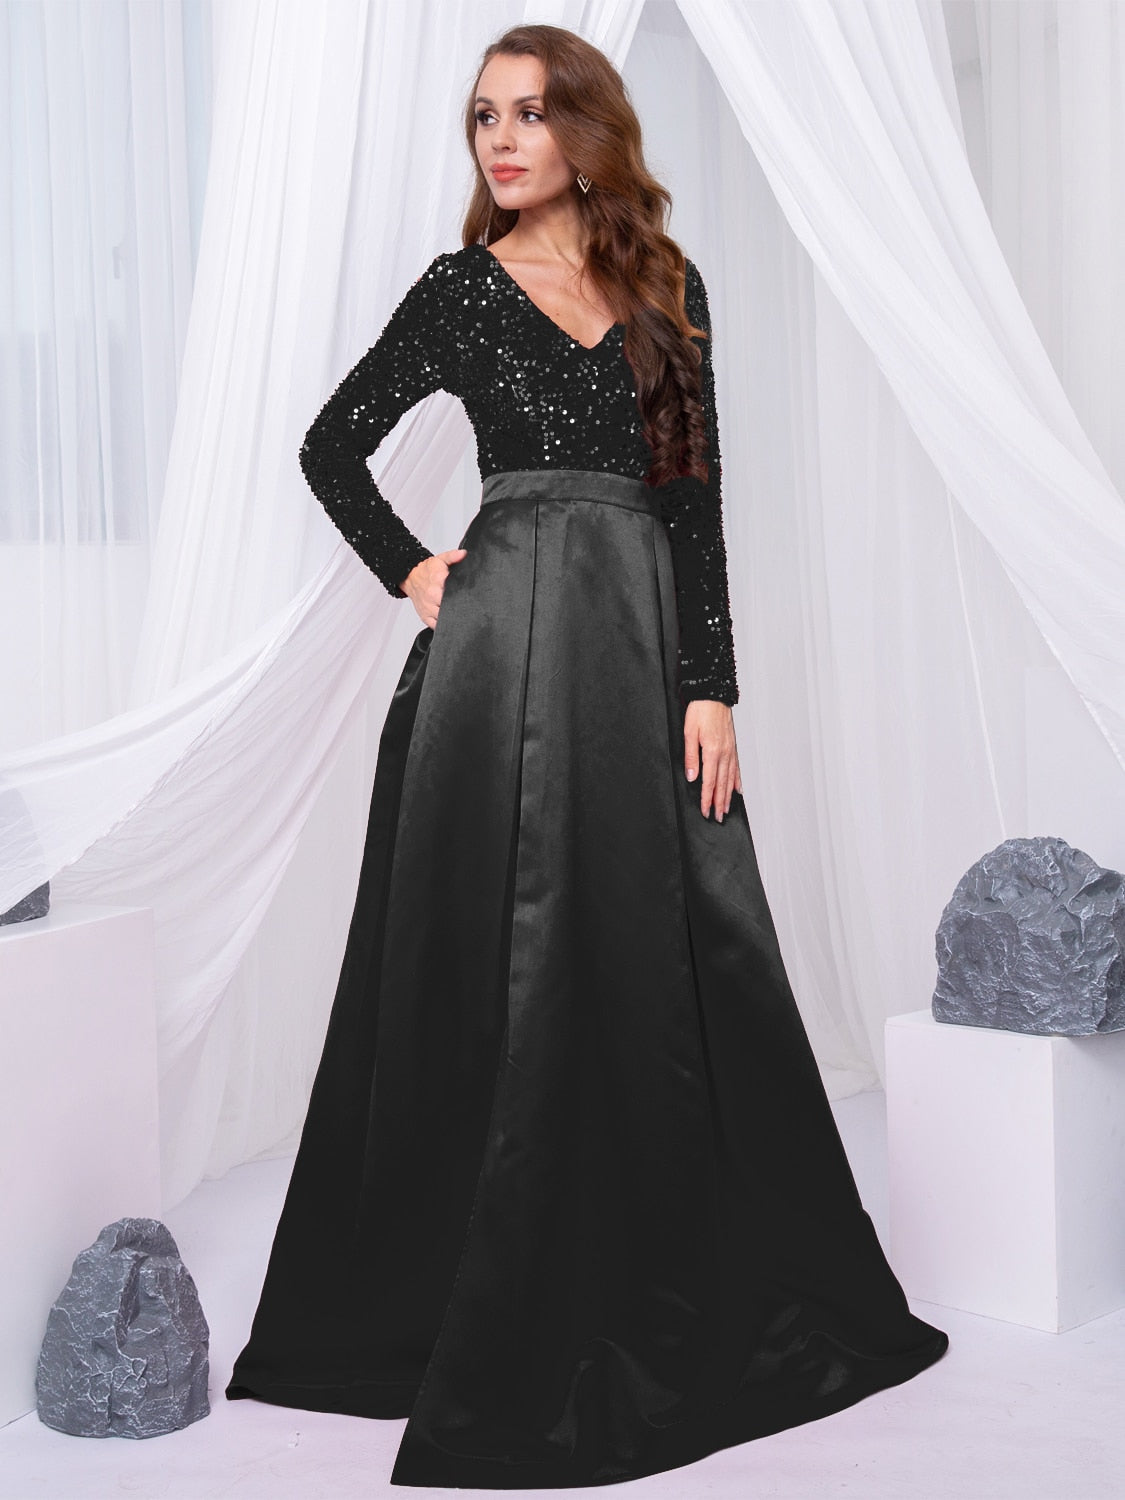 Long Sleeve V Neck Stretch Sparkle Sequin Floor Length Party Dress Slit Patchwork Ball Gown with Porckets - kmtell.com